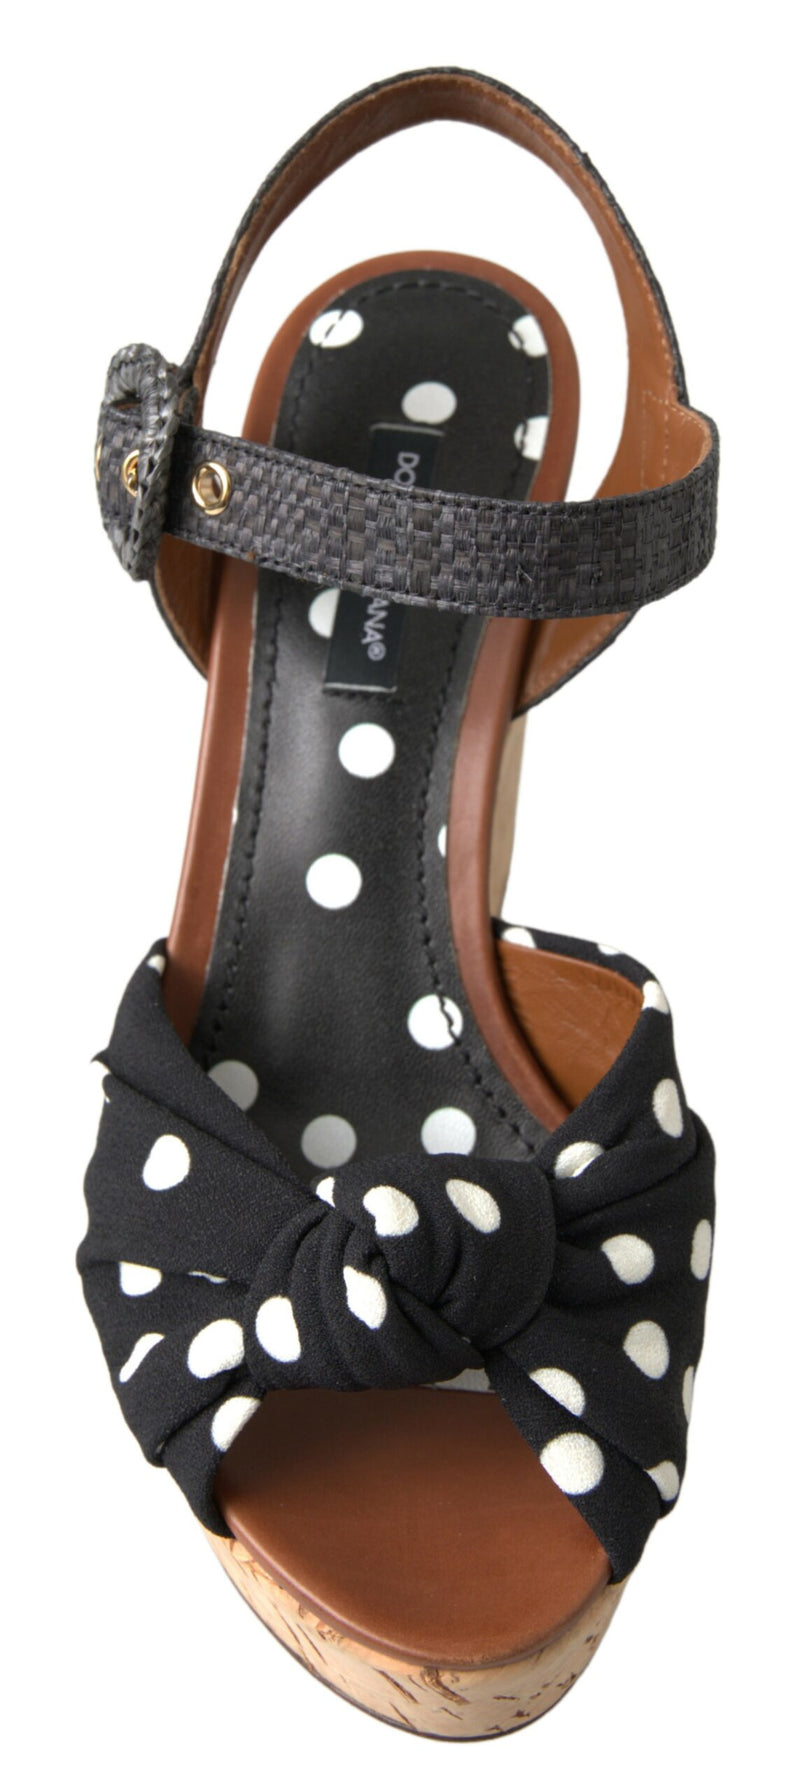 Dolce & Gabbana Black  Wedges Polka Dotted Ankle Strap Shoes Women's Sandals